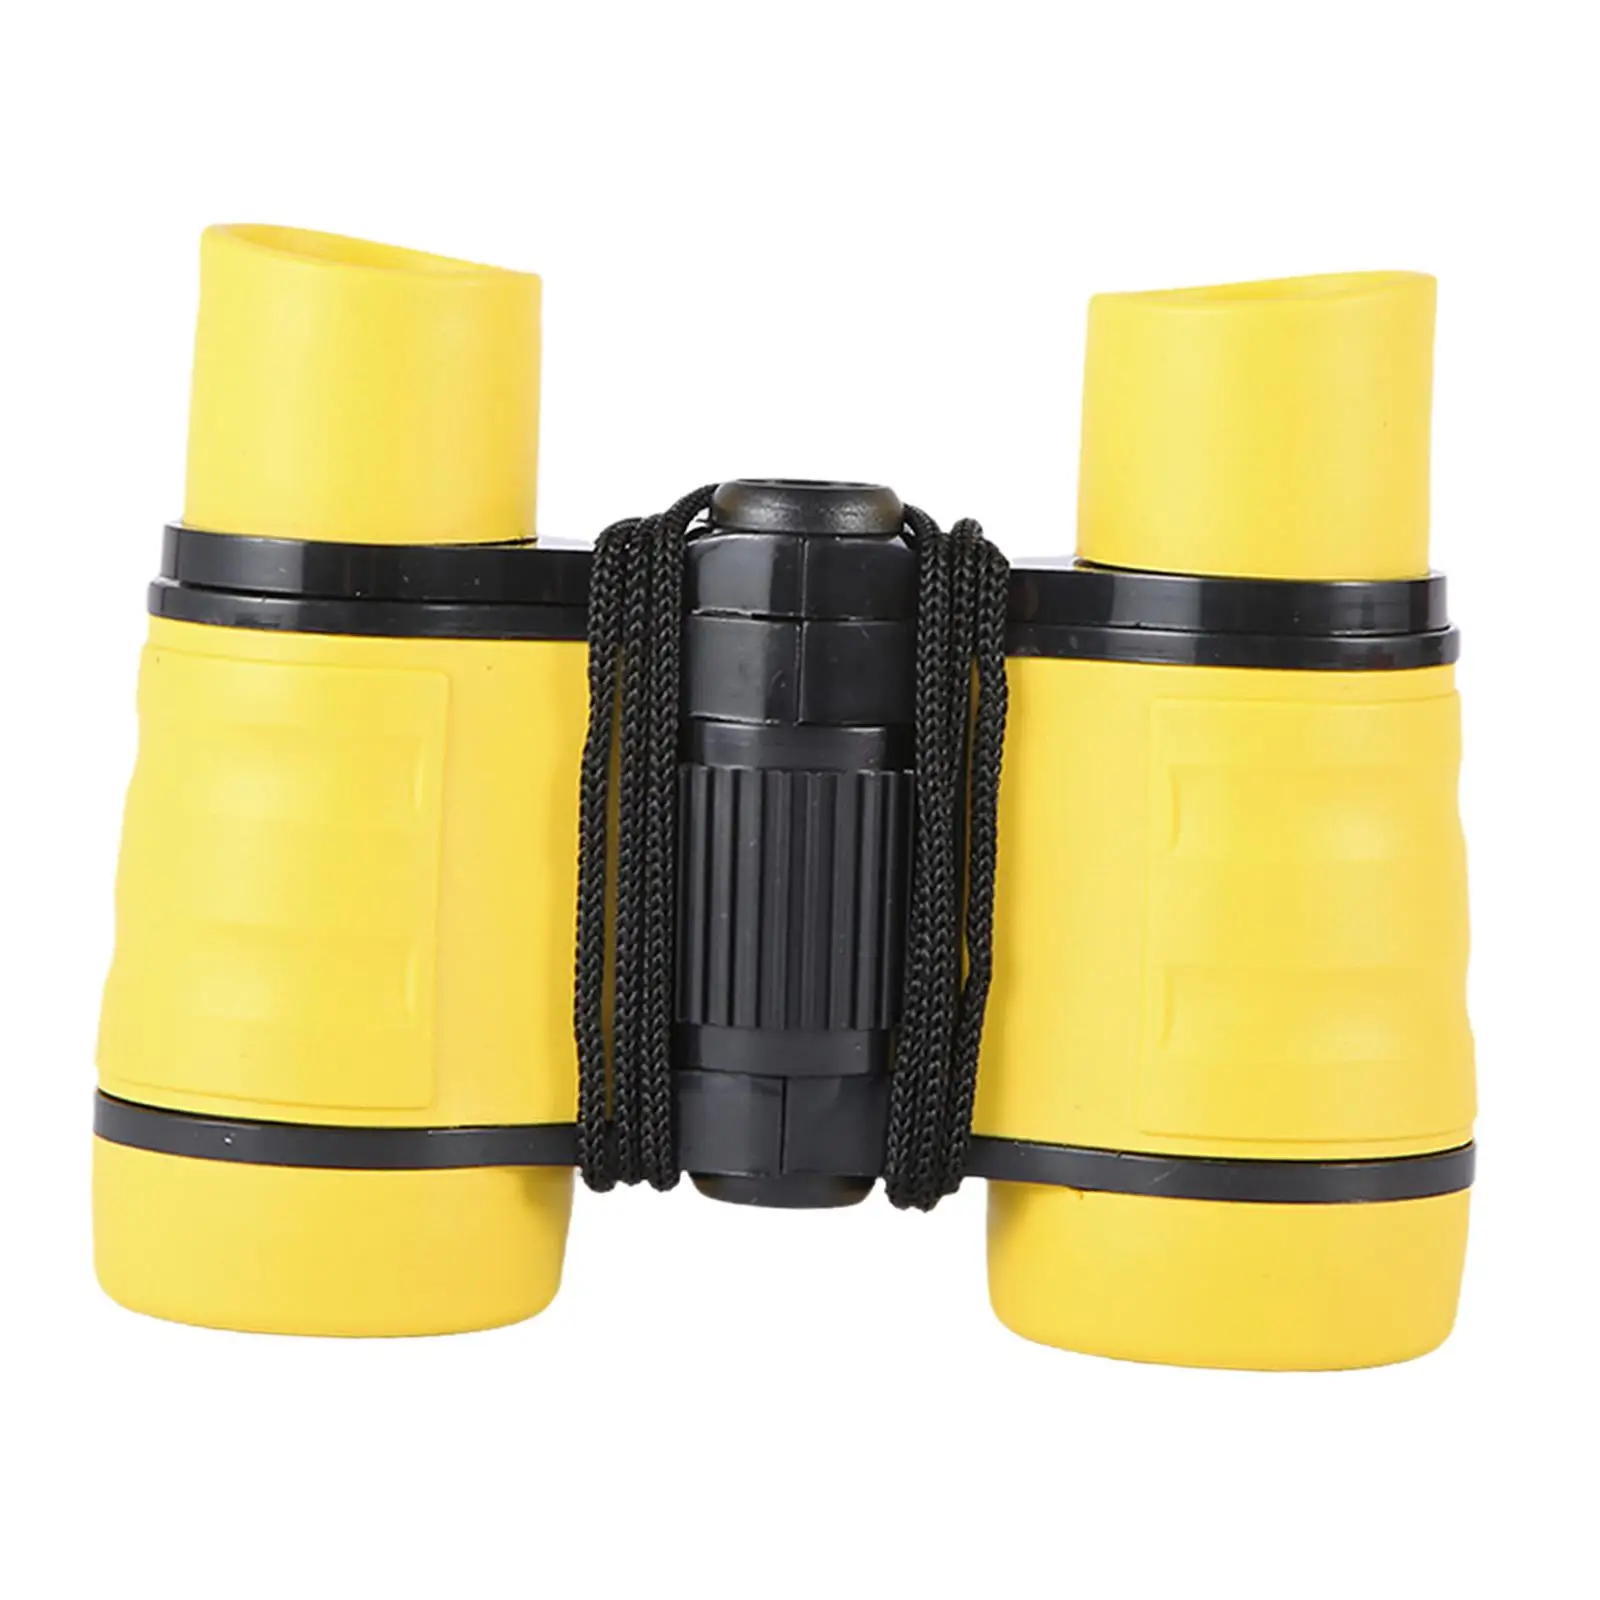 Kids Binoculars 4x30 Shockproof Bird Watching Telescope Portable for Detective Hunting Party Favors Outdoor Activity Hiking